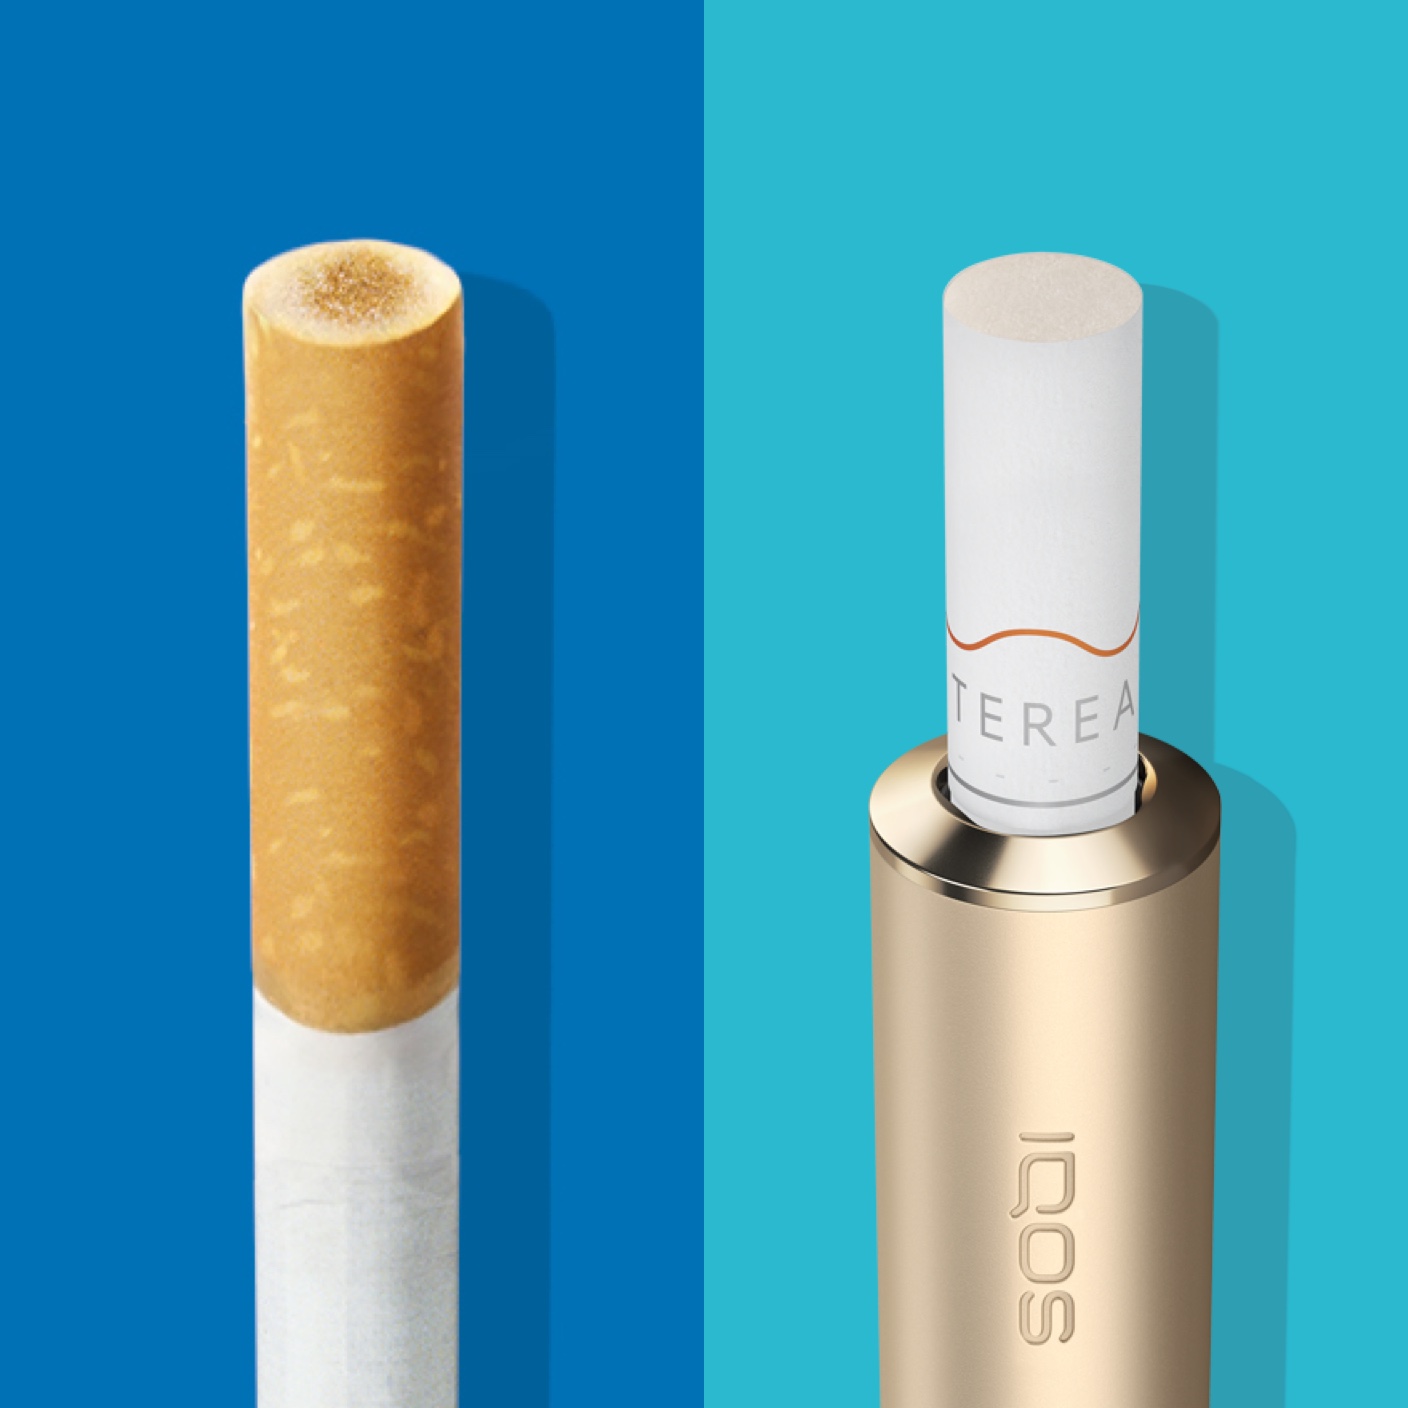 Cigarette filter with brown combustion stains compared to IQOS HEETS stick in IQOS ILUMA holder with no equivalent stain